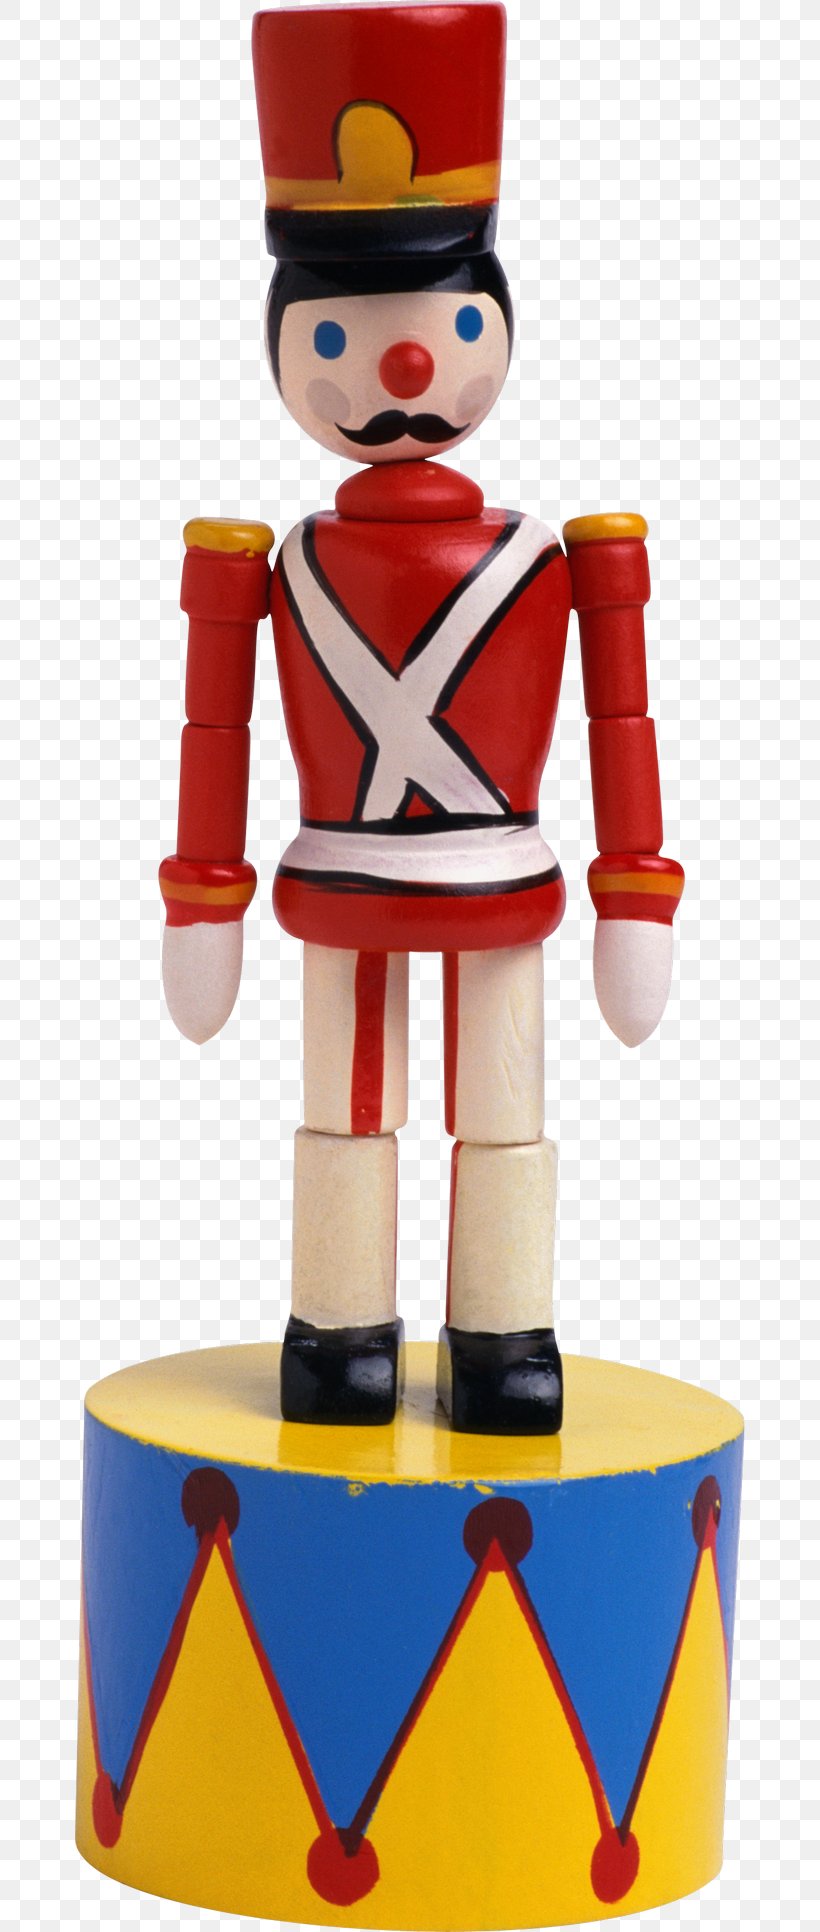 Toy Soldier Clip Art, PNG, 670x1932px, Toy, Action Toy Figures, Decorative Nutcracker, Digital Image, Doll Download Free